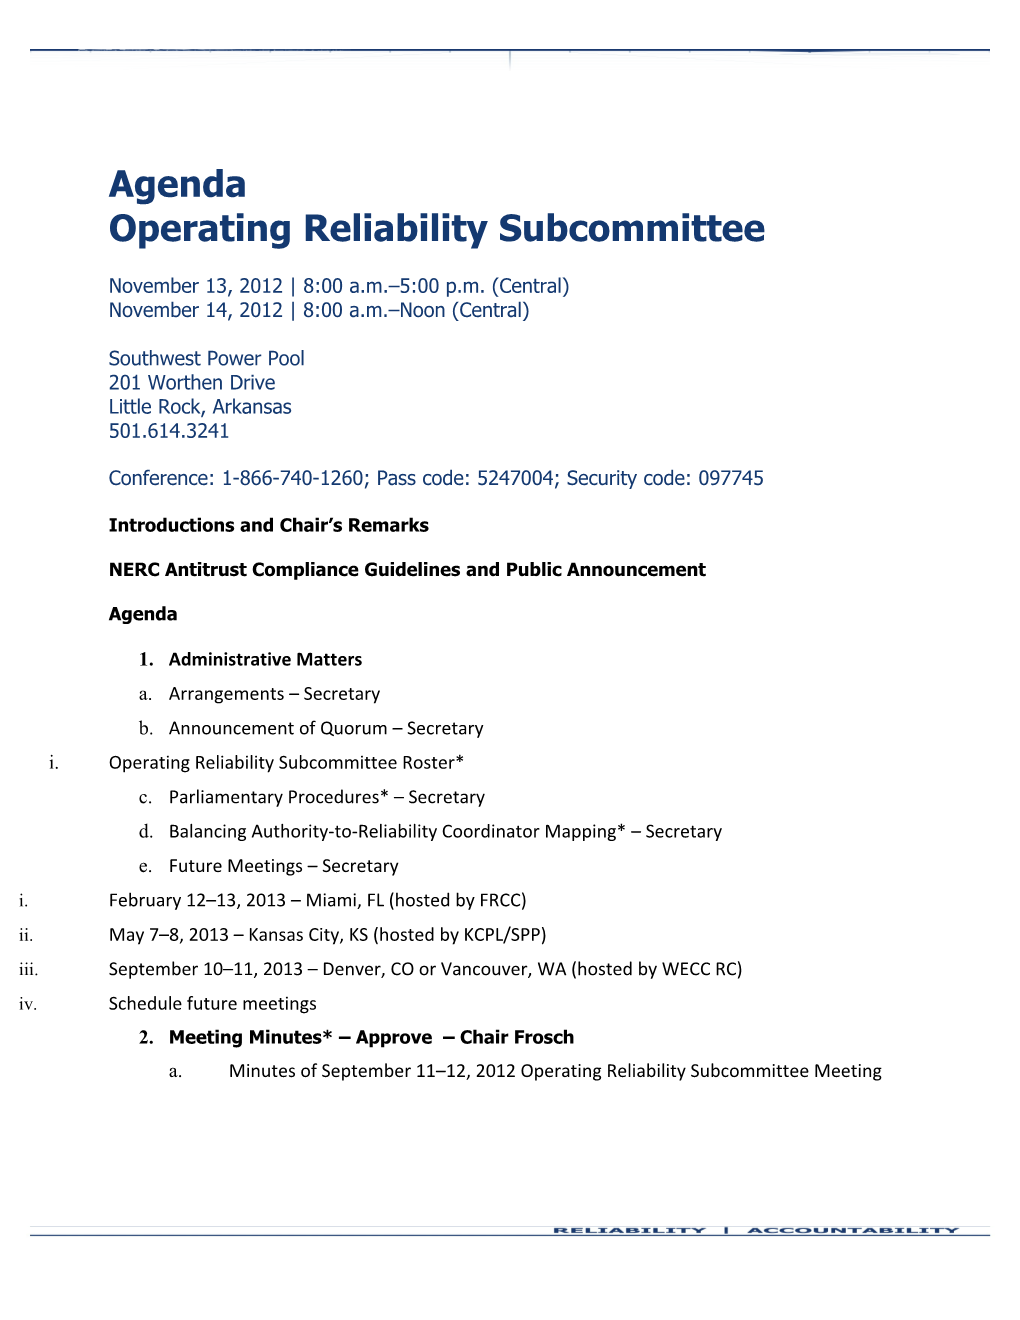 Operating Reliability Subcommittee